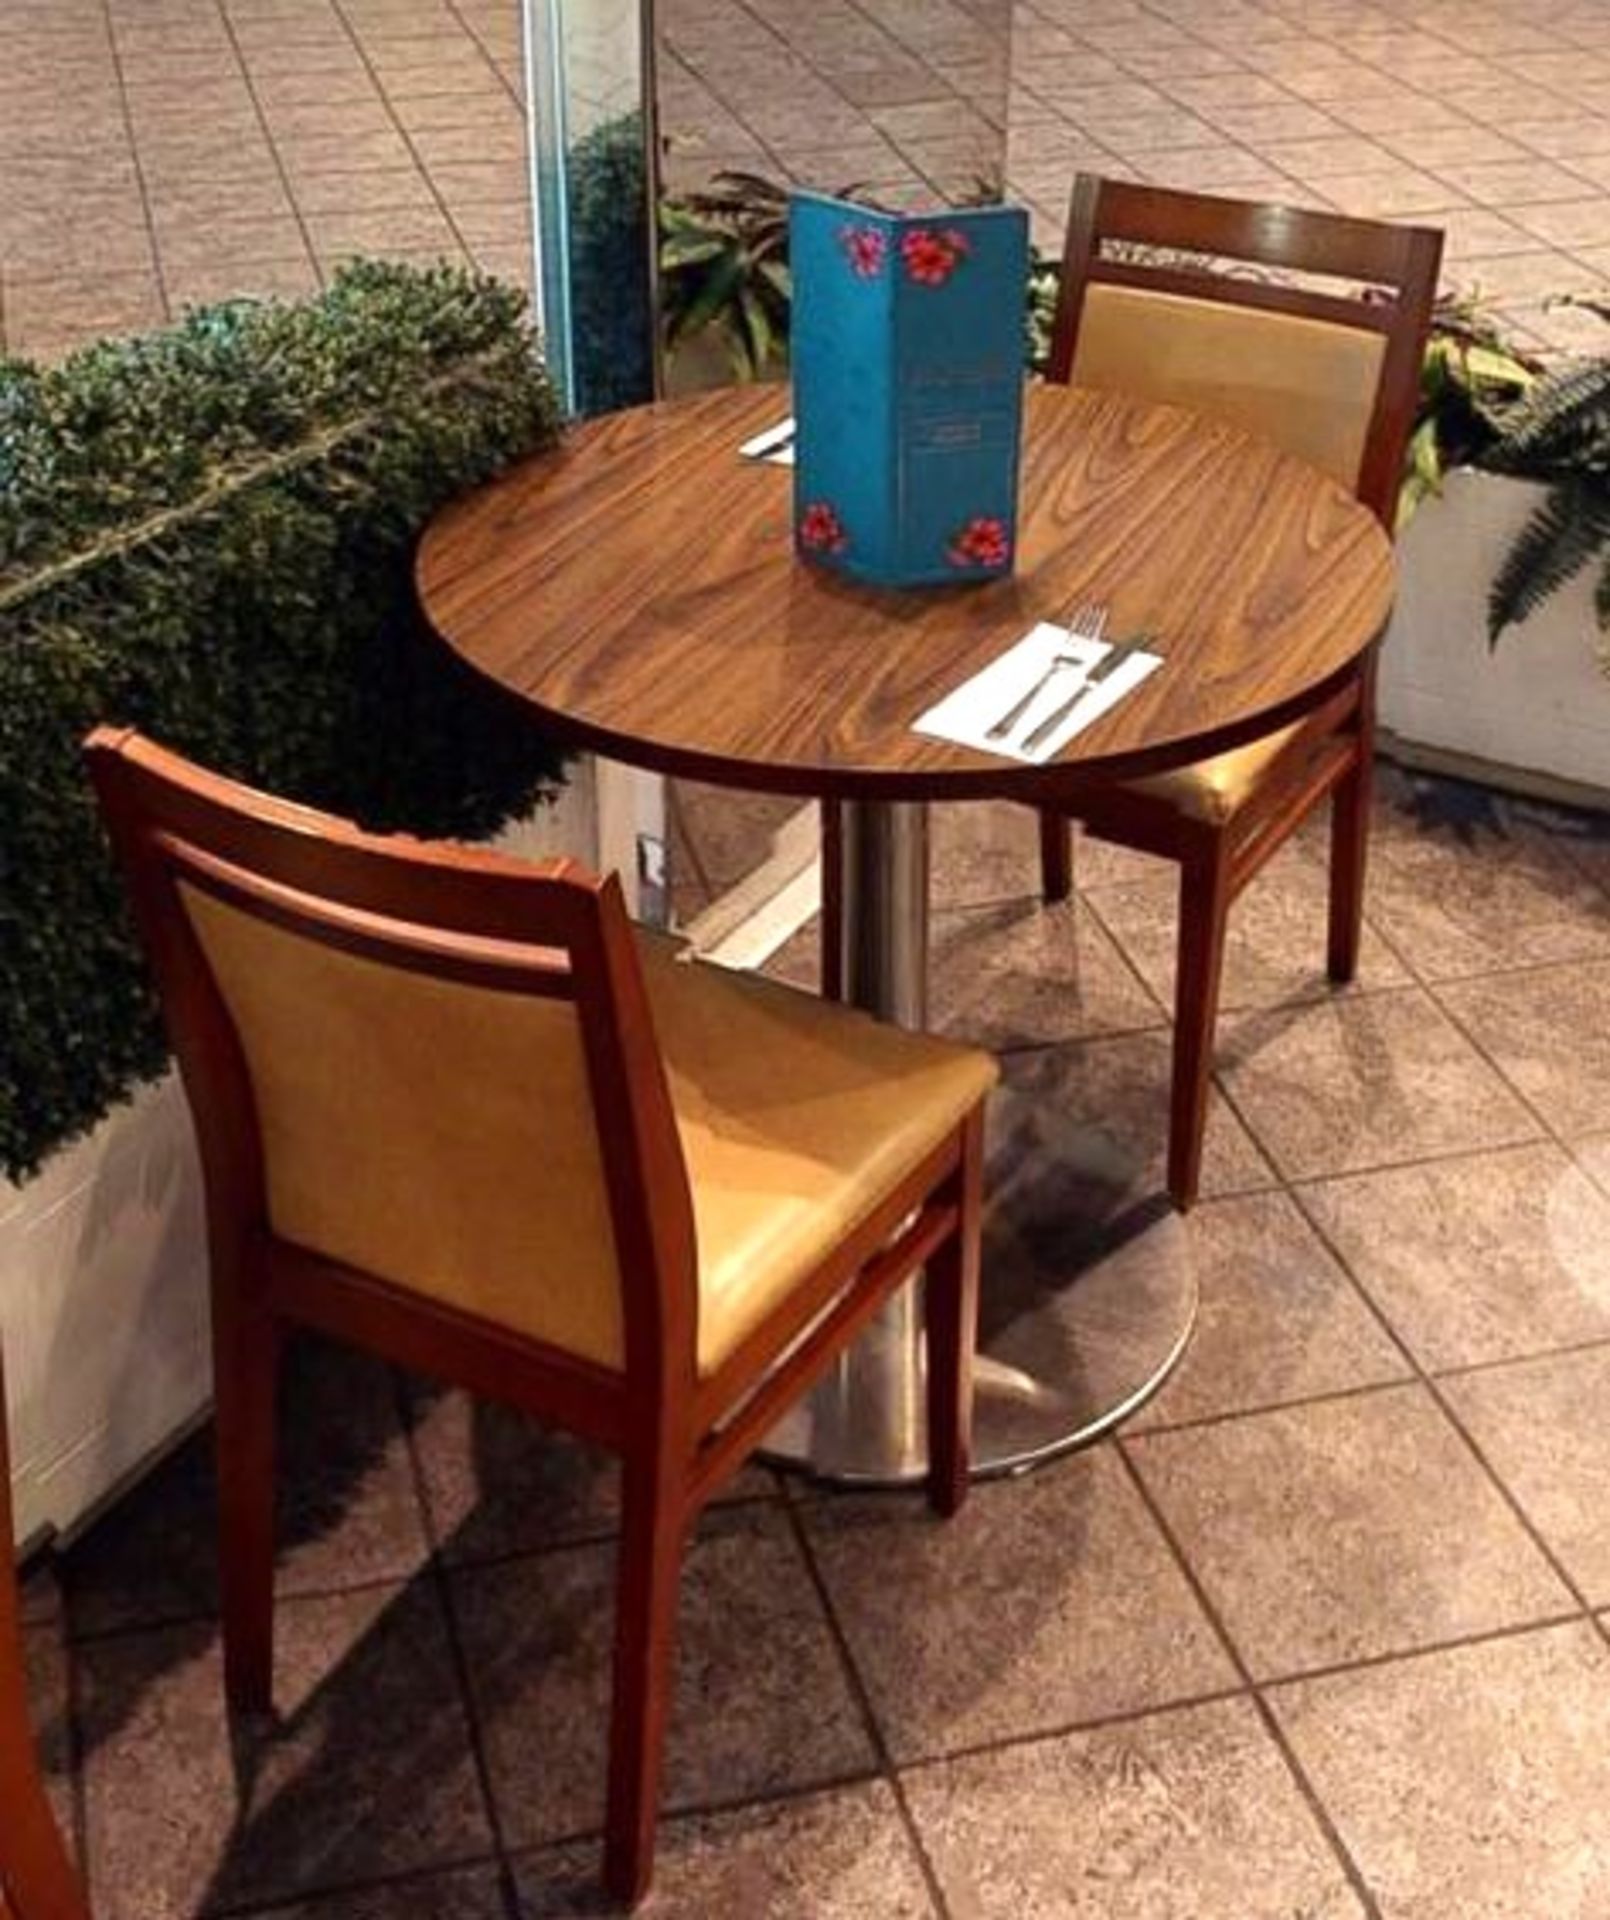 8 x High Quality Restaurant Chairs With Wooden Frames and Leather Seat Pads - Image 2 of 4